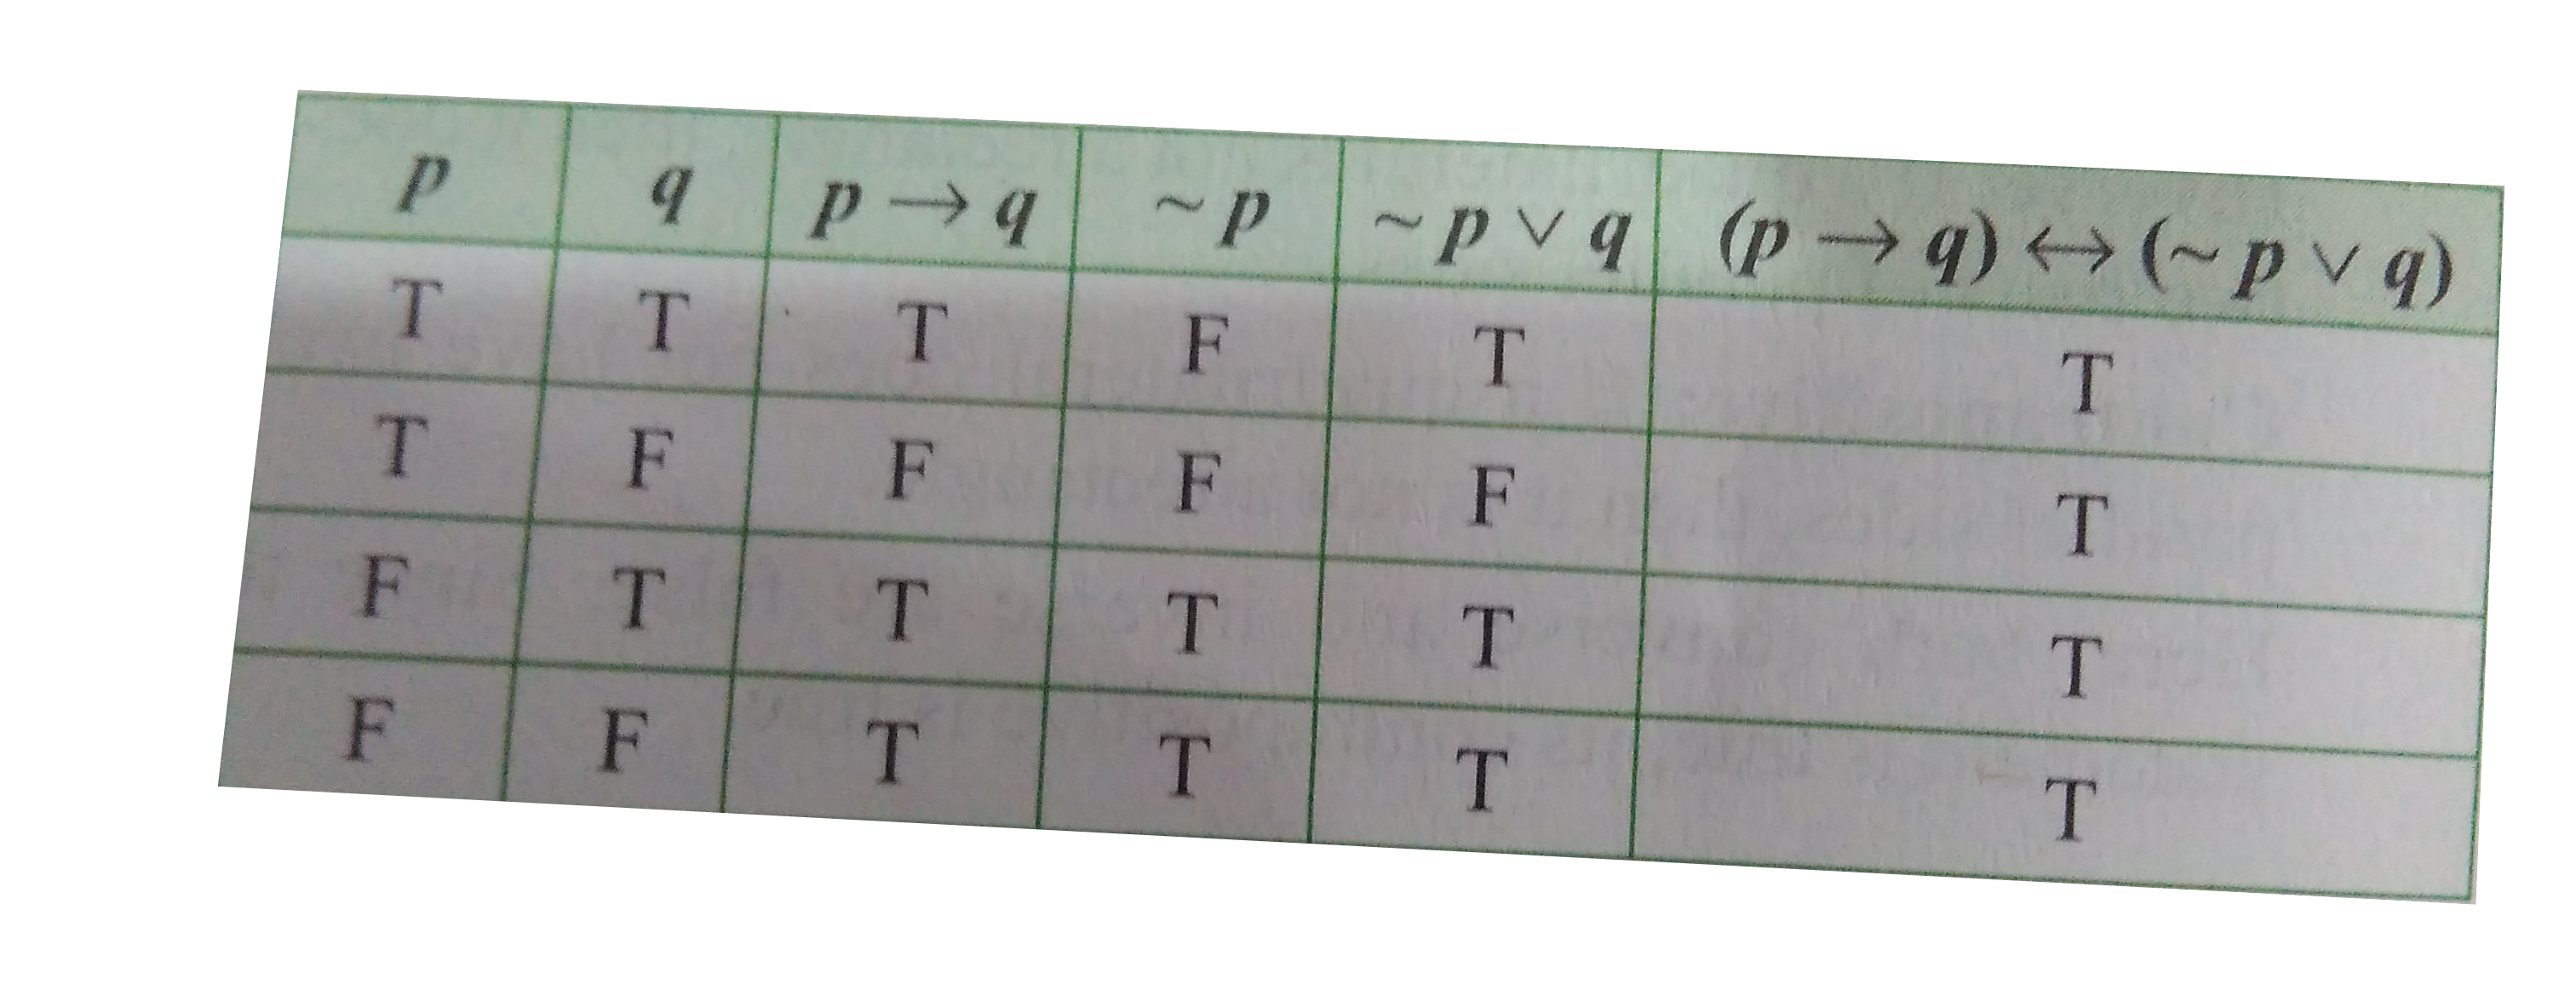 In The Truth Table For The Statements P To Q Harr P Vvq The